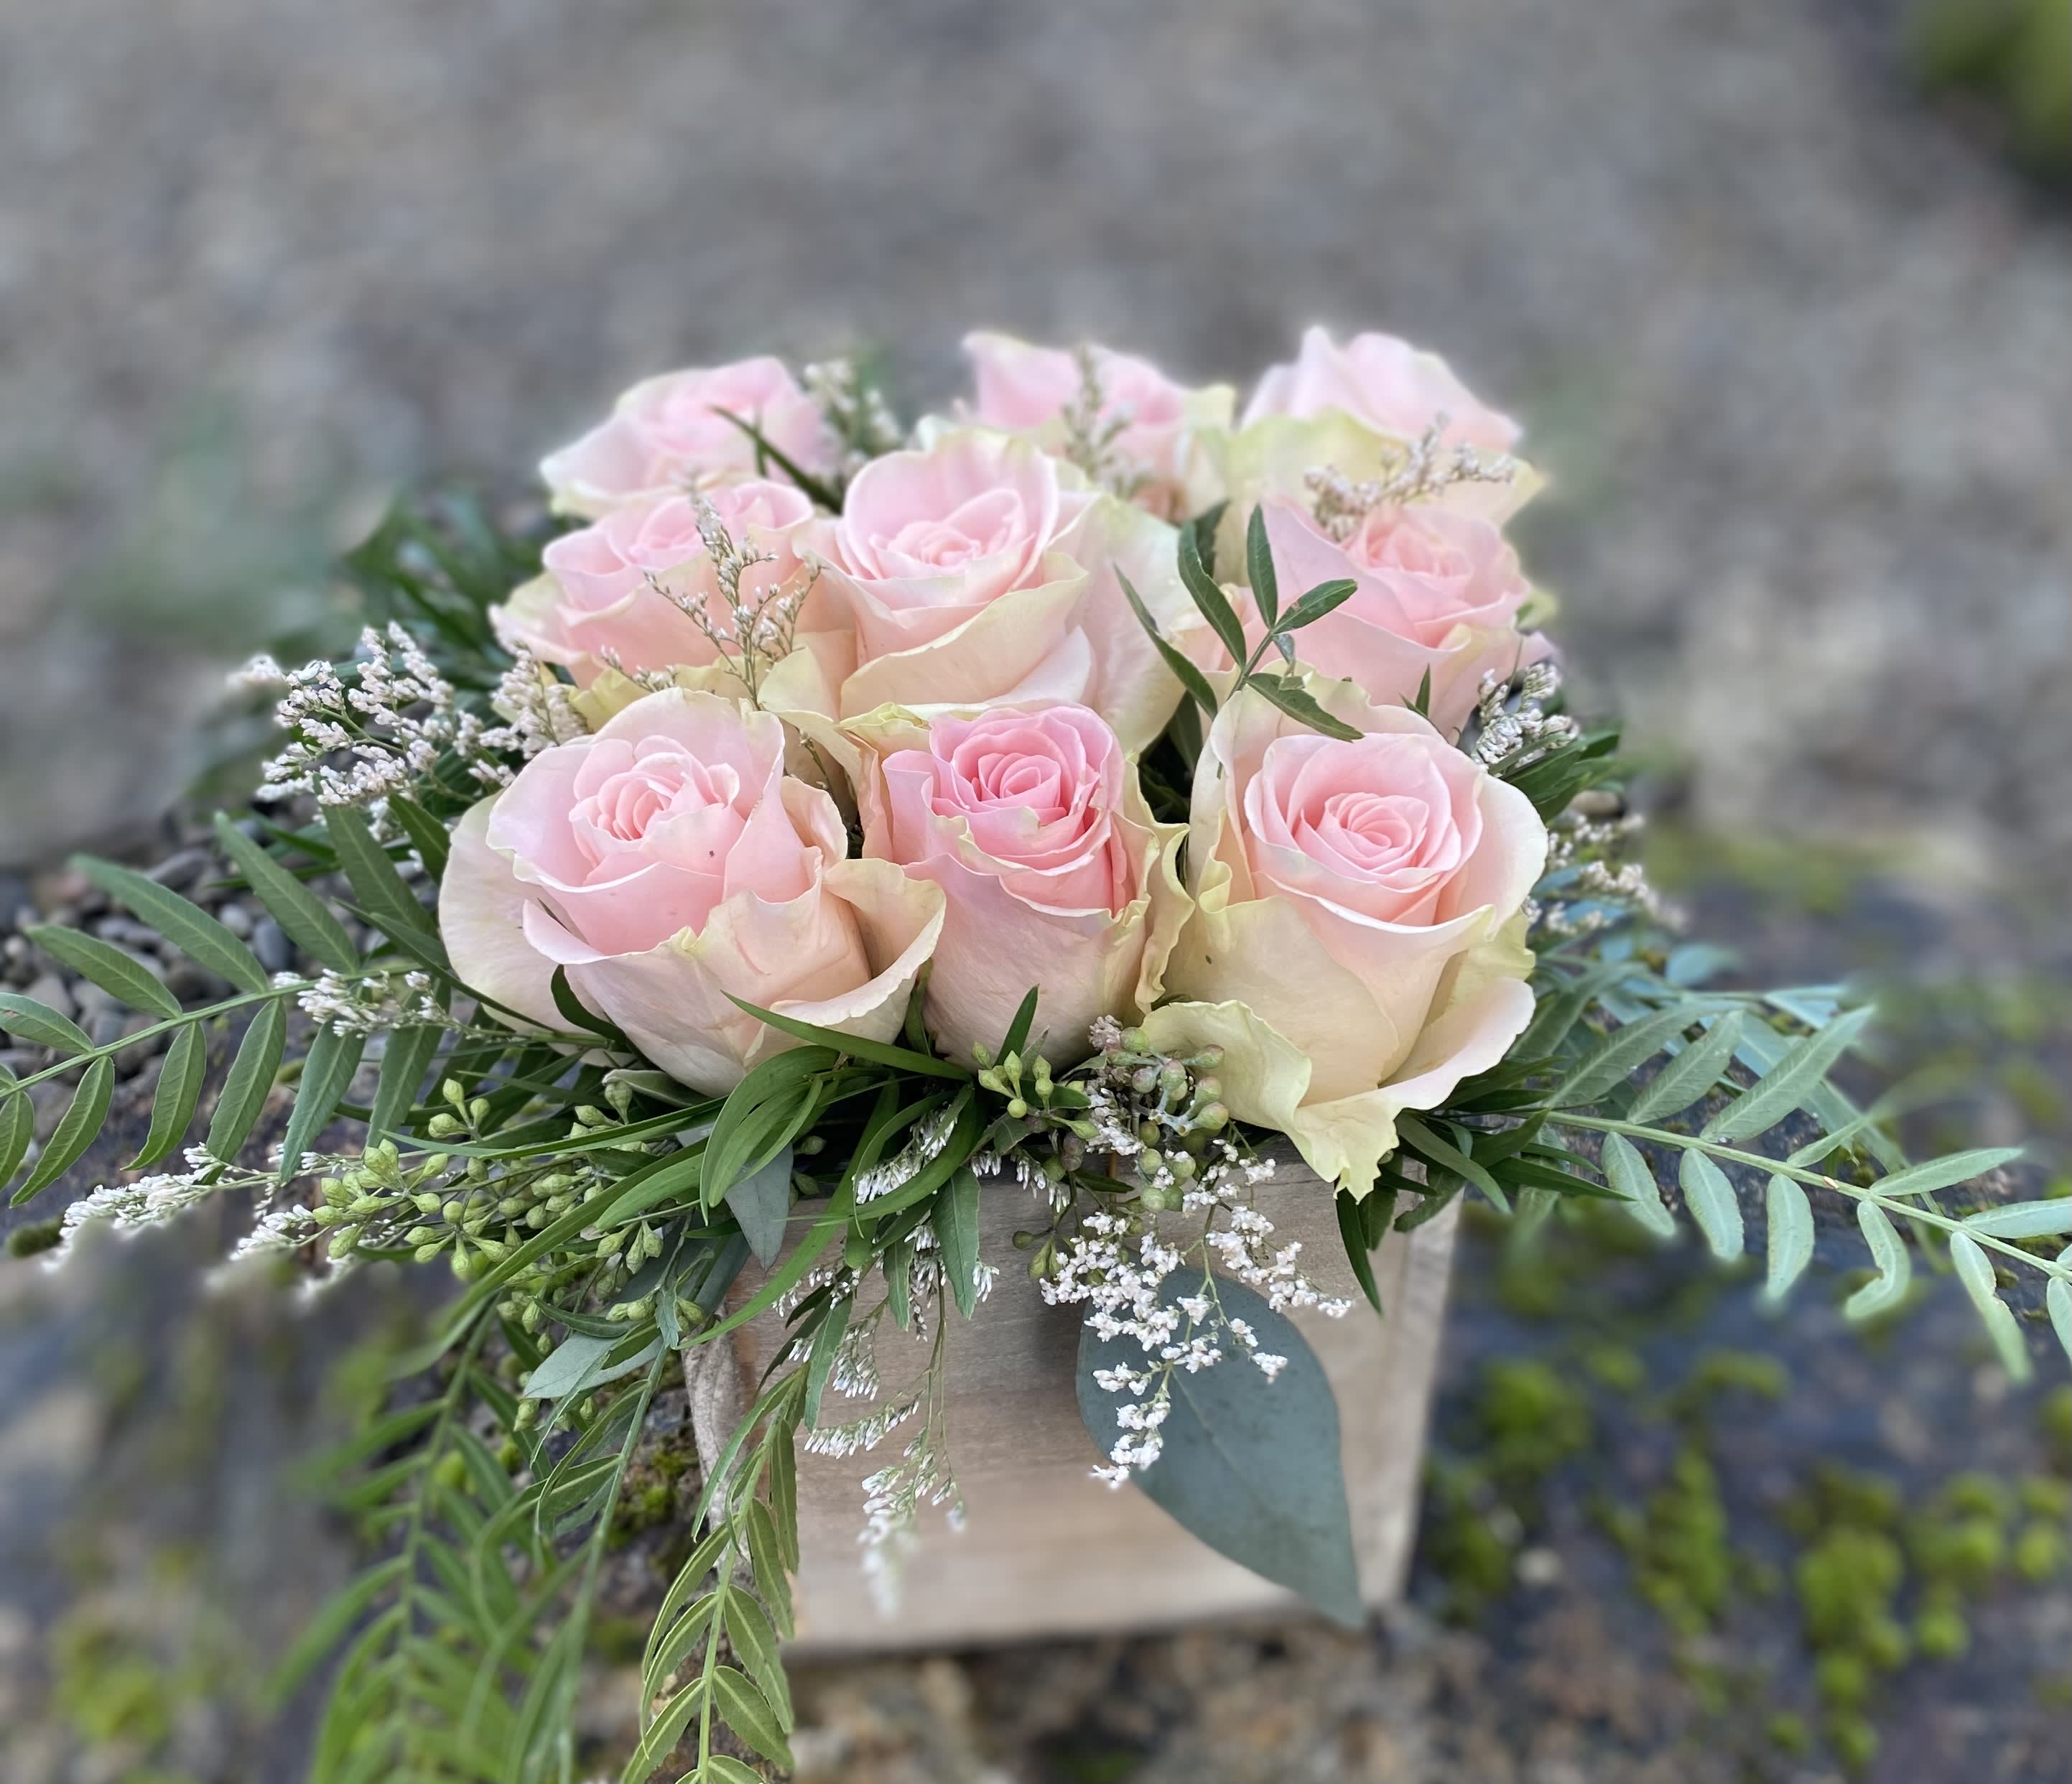 Rustic Love  - Roses in a rustic box includes 9 blooms in sweetheart colors.   Rose color may vary based on availability. Upgrade to Deluxe for a full dozen